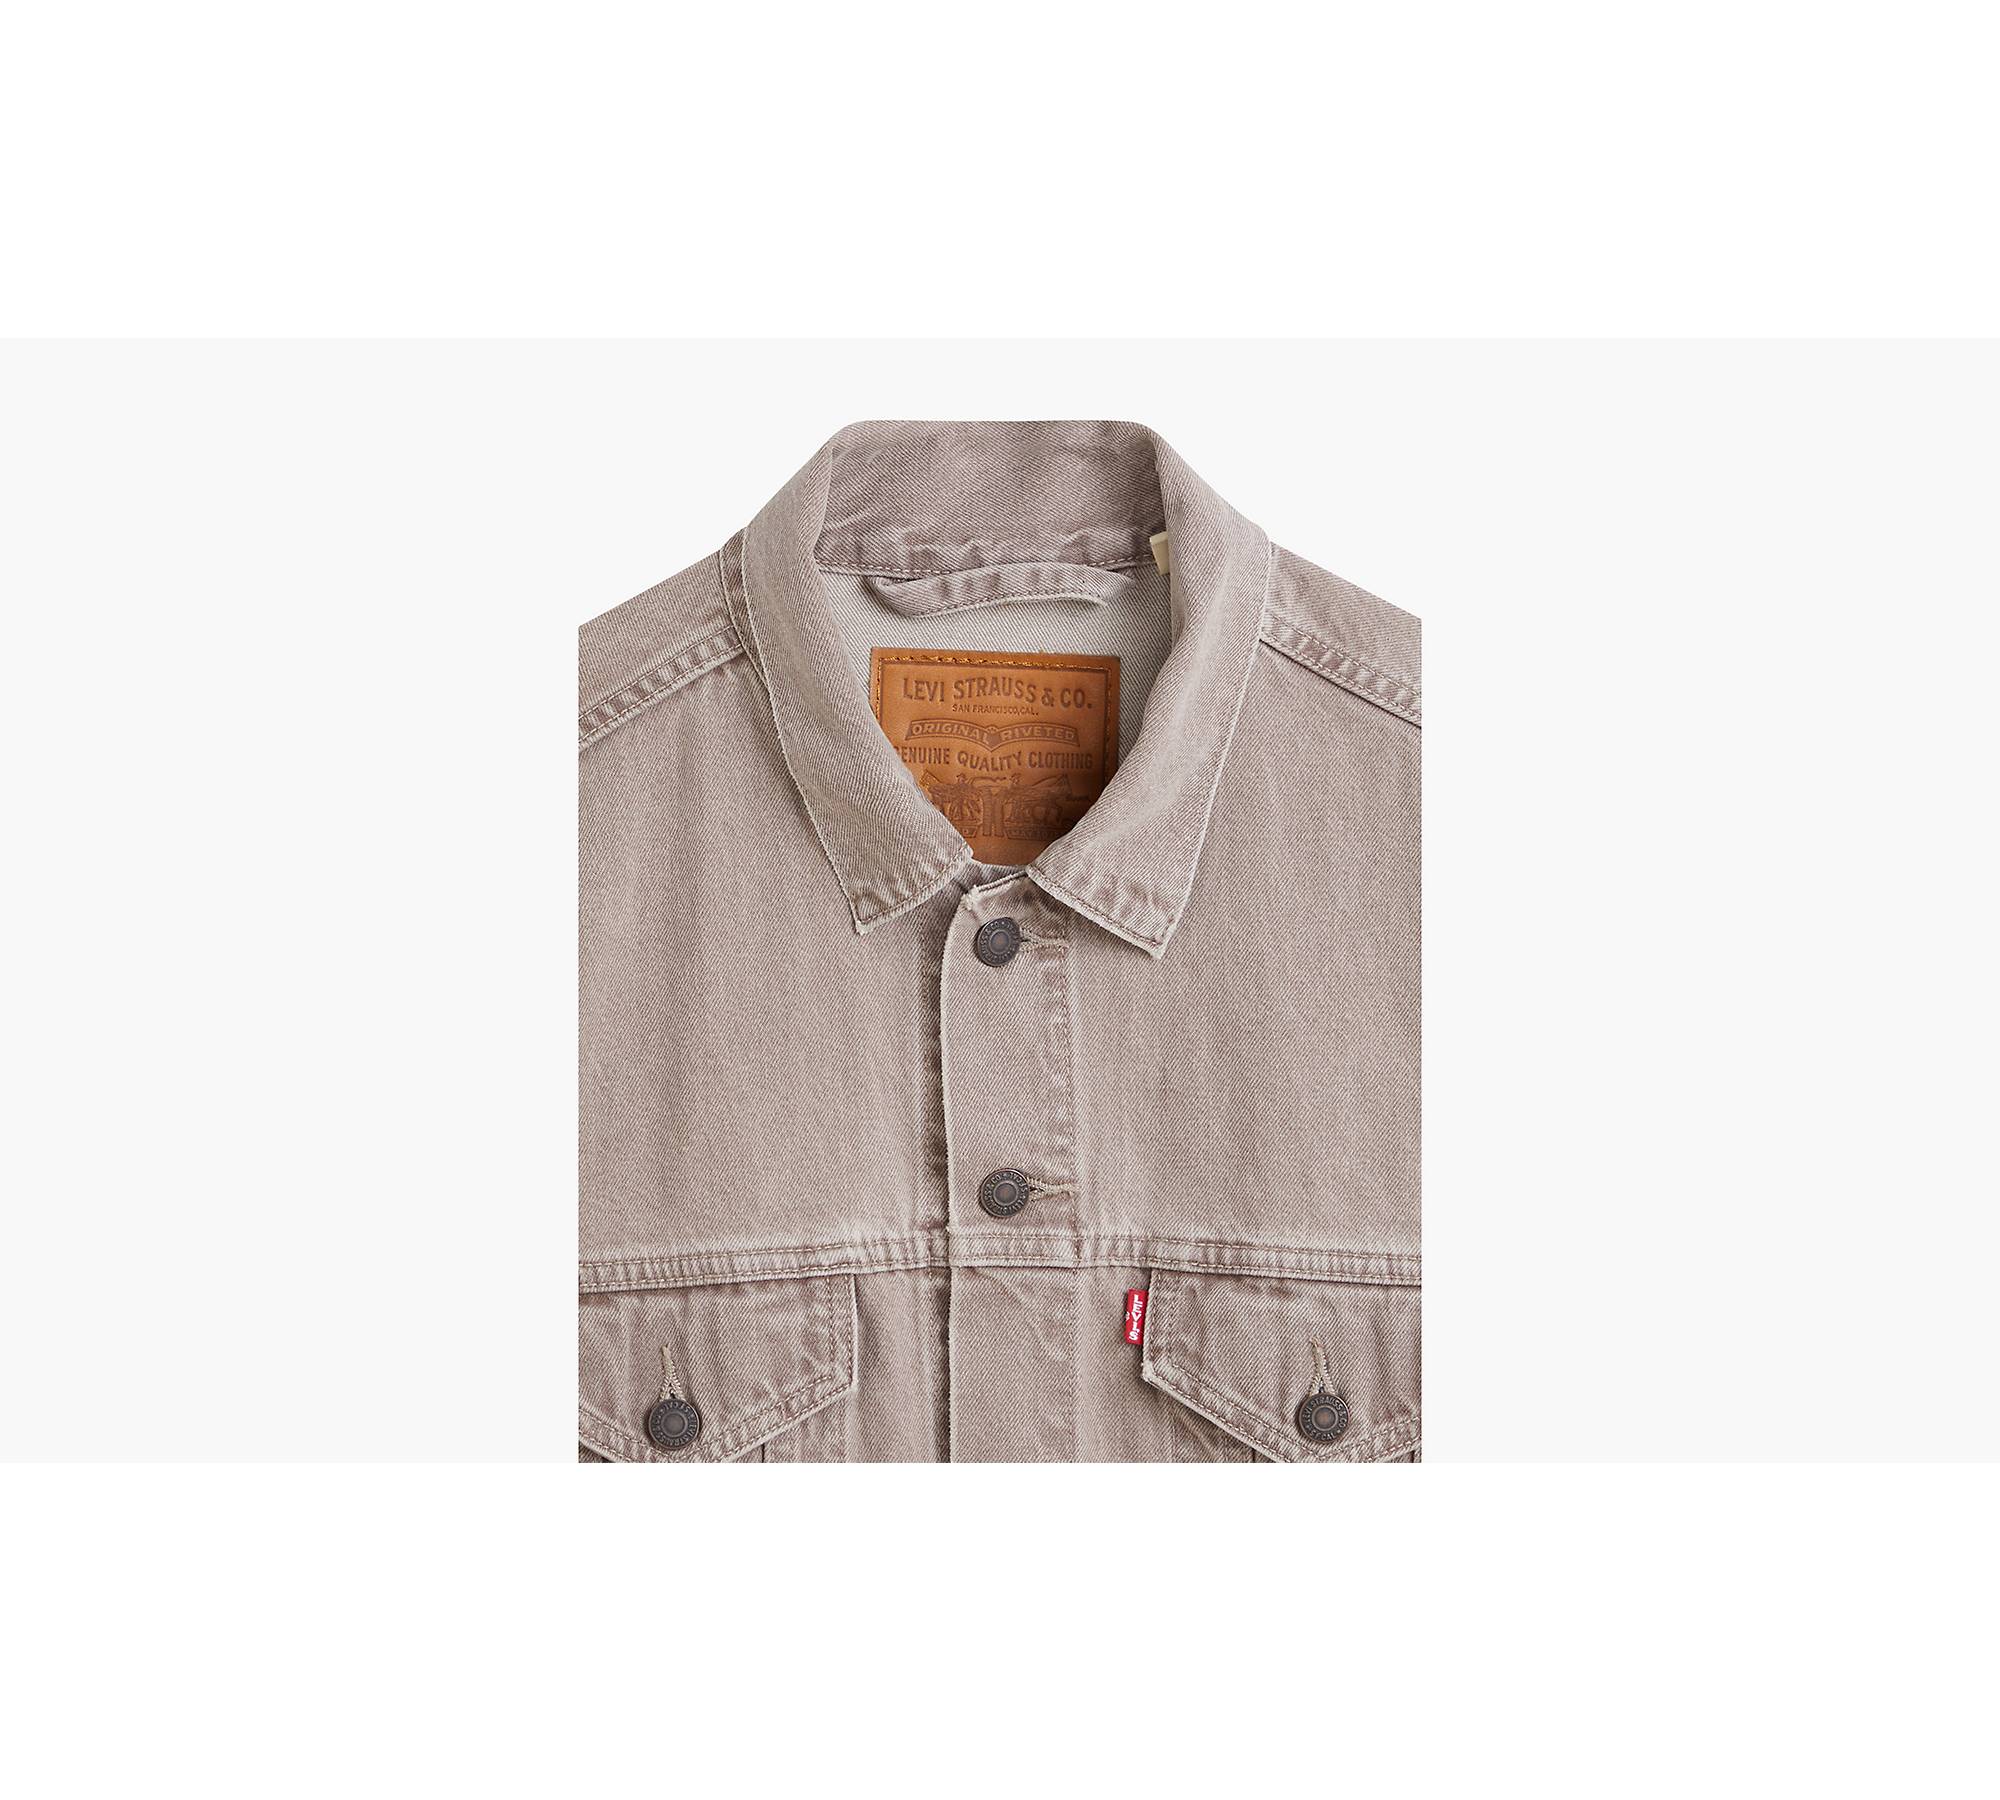 Vintage Relaxed Fit Trucker Jacket - Brown | Levi's® US